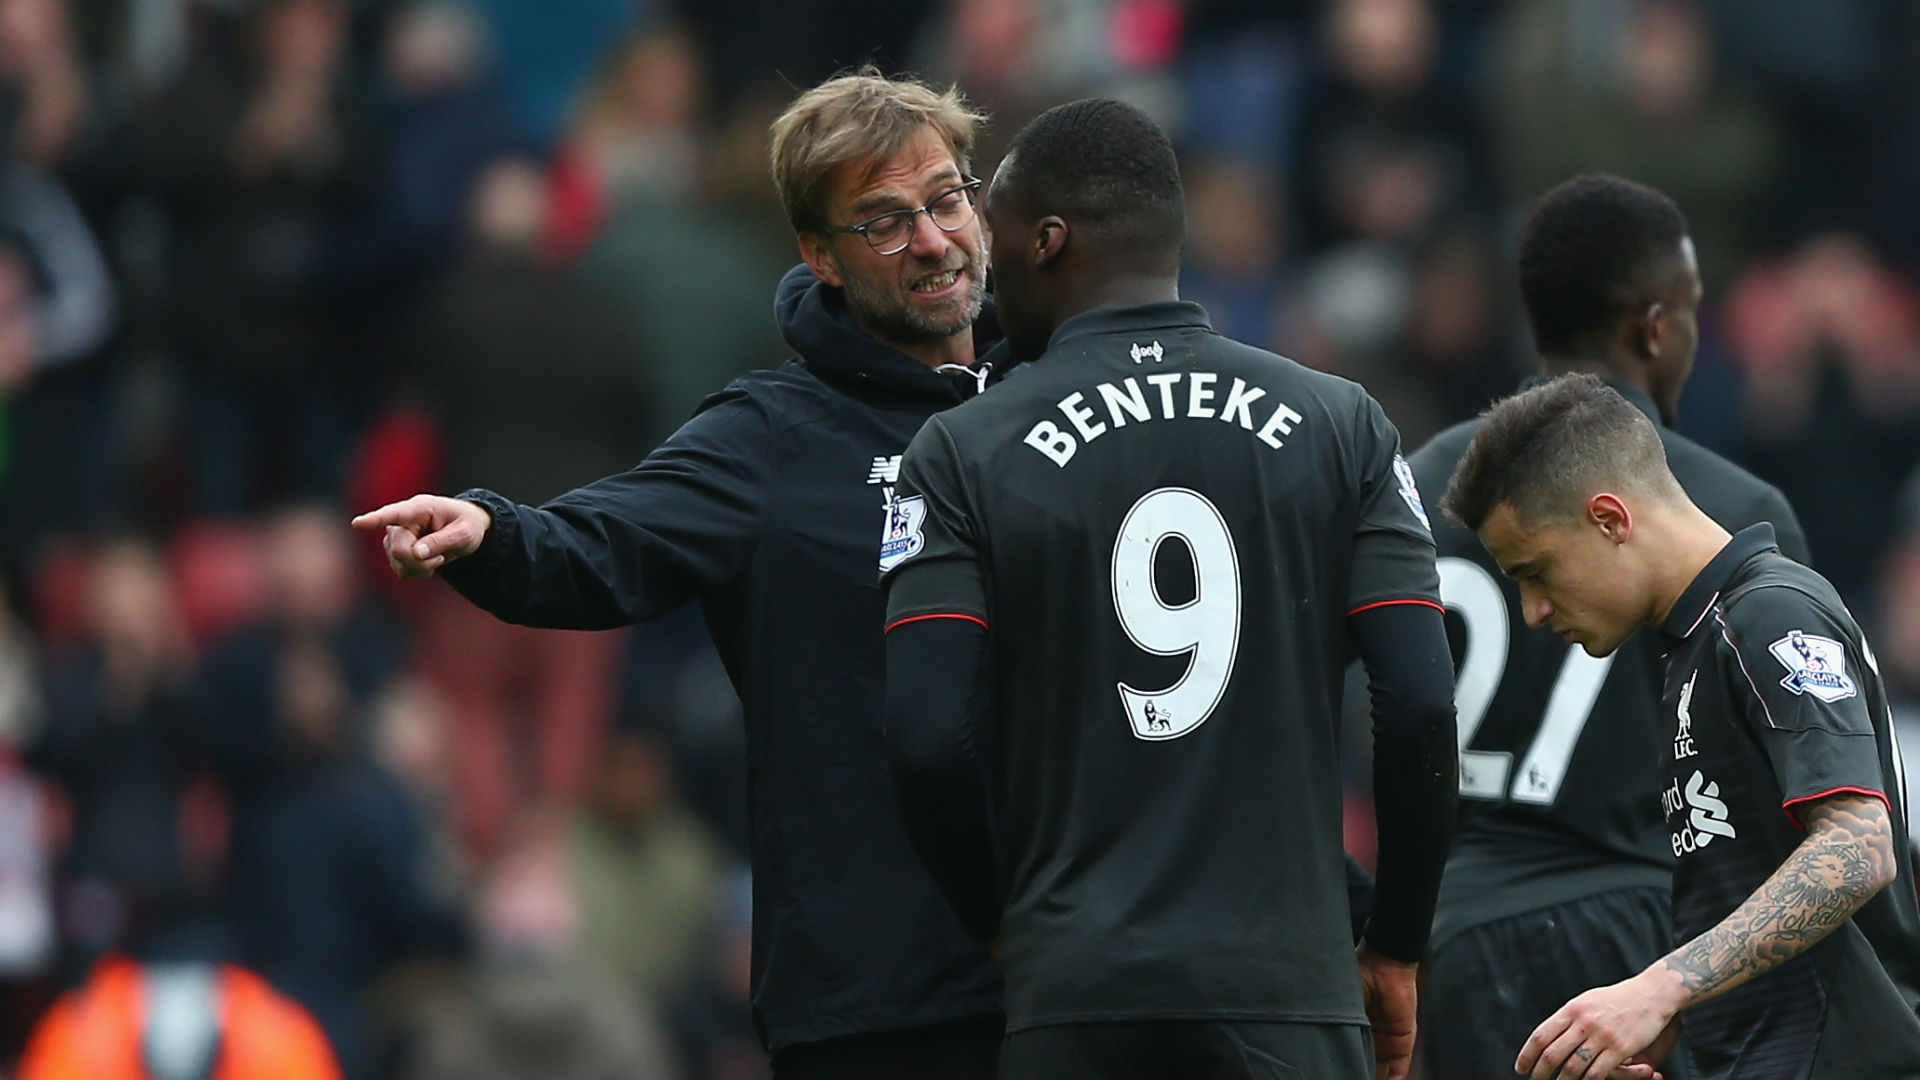 Crystal Palace In Talks To Sign Christian Benteke From Liverpool